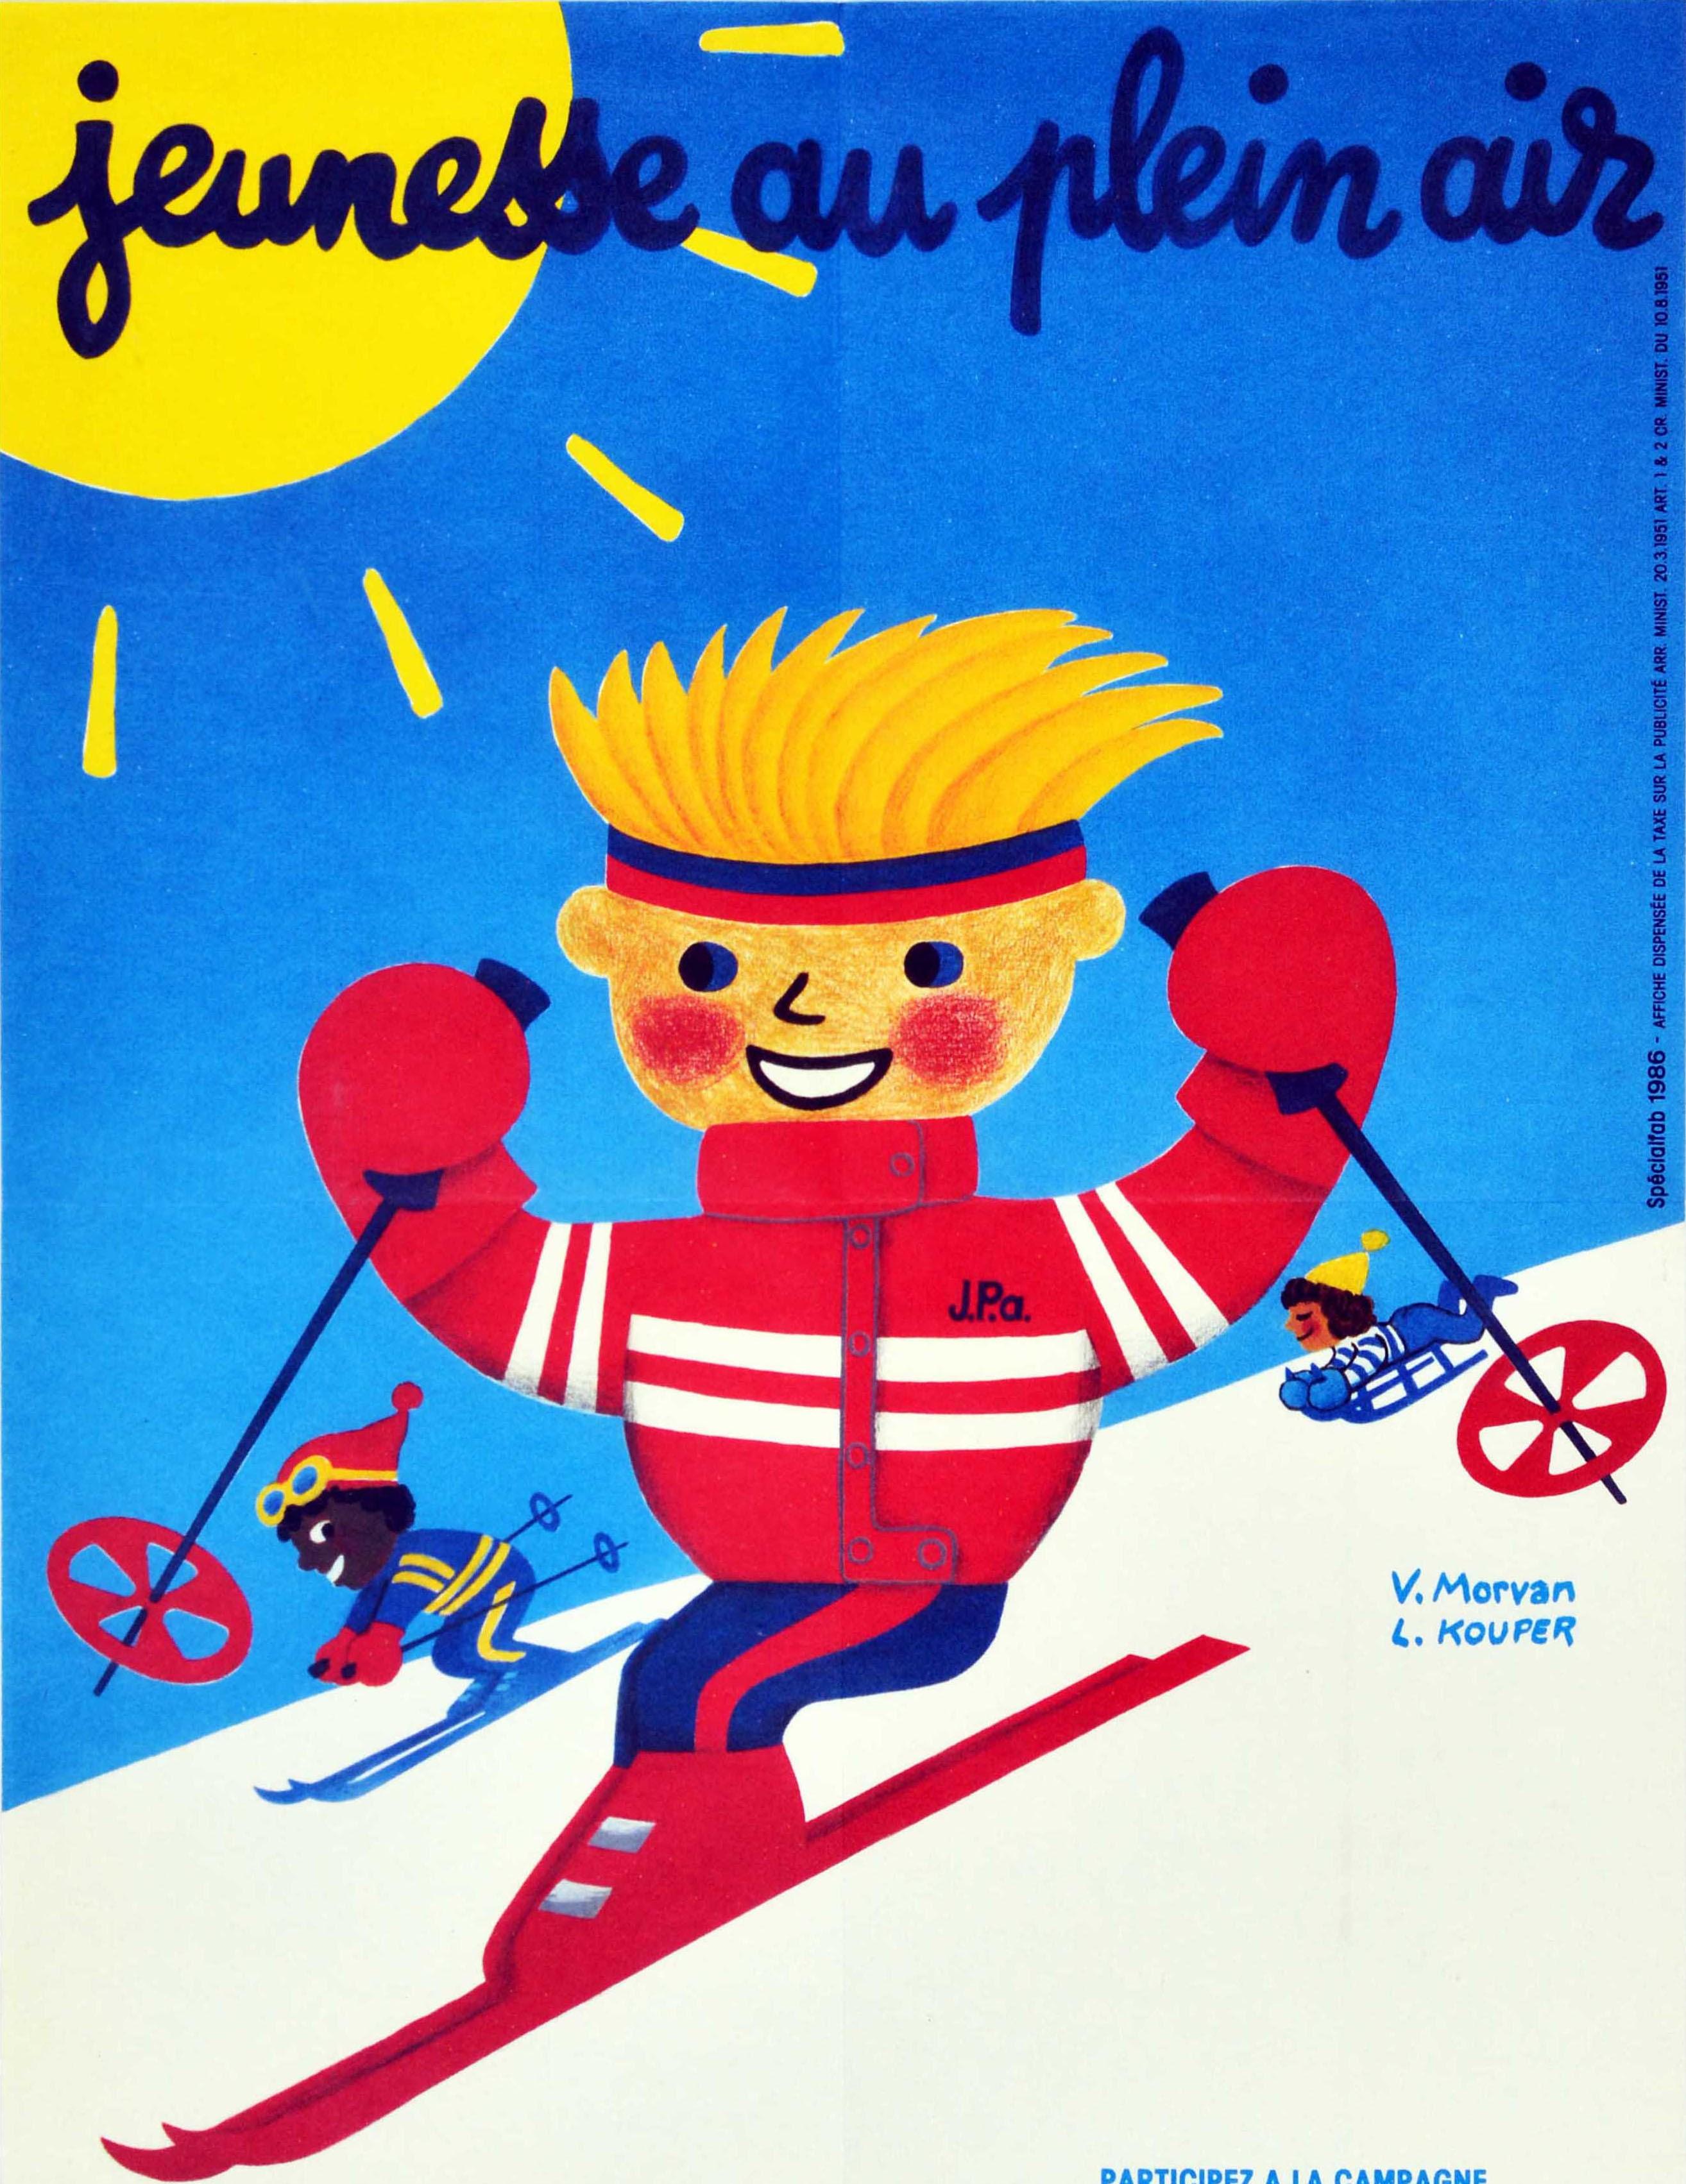 Original vintage ski travel poster - Jeunesse au plein air / Youth in the outdoors - featuring a cartoon style image of a young smiling young boy wearing a headband and skiing down a slope with another boy skiing at speed in front of a girl on a